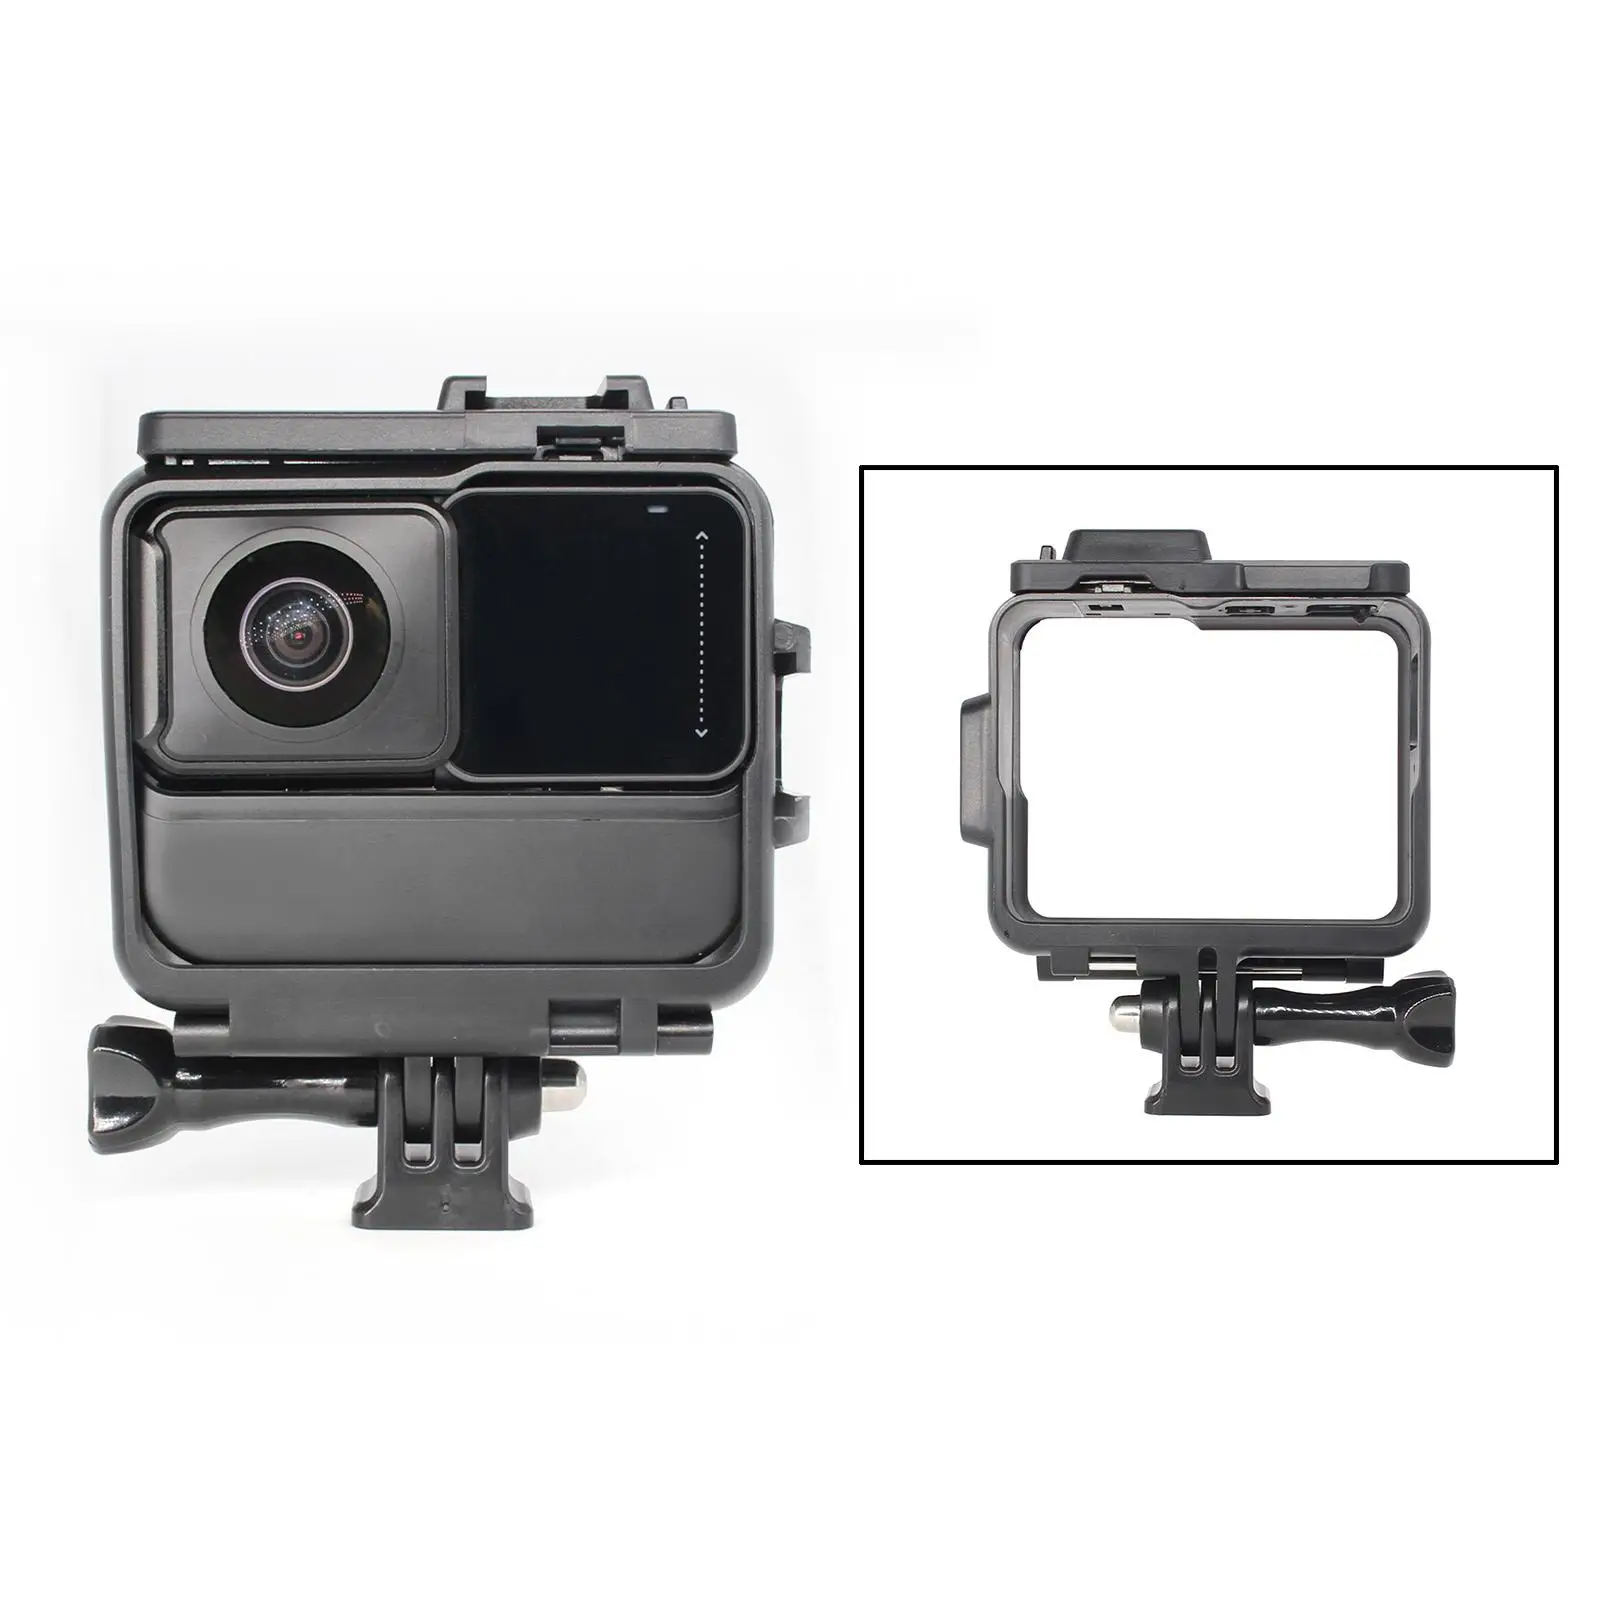 Battery Base Mounting Bracket for Camera Mounts Clamps Camera Photo Accessories